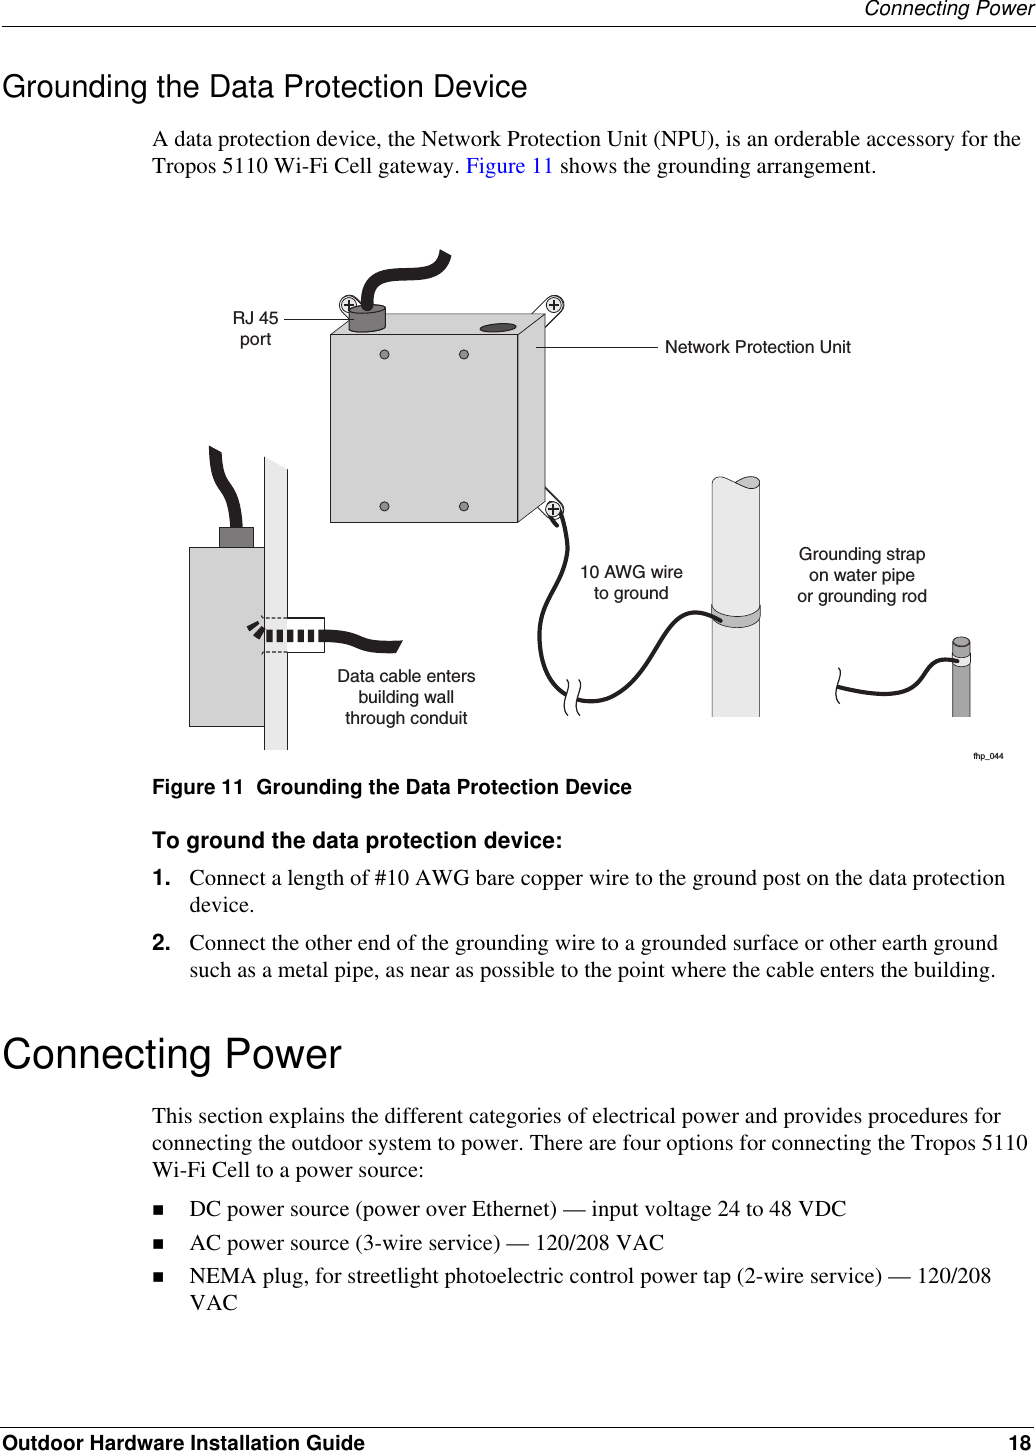 Connecting PowerOutdoor Hardware Installation Guide 18Grounding the Data Protection DeviceA data protection device, the Network Protection Unit (NPU), is an orderable accessory for the Tropos 5110 Wi-Fi Cell gateway. Figure 11 shows the grounding arrangement.Figure 11  Grounding the Data Protection DeviceTo ground the data protection device:1. Connect a length of #10 AWG bare copper wire to the ground post on the data protection device.2. Connect the other end of the grounding wire to a grounded surface or other earth ground such as a metal pipe, as near as possible to the point where the cable enters the building.Connecting PowerThis section explains the different categories of electrical power and provides procedures for connecting the outdoor system to power. There are four options for connecting the Tropos 5110 Wi-Fi Cell to a power source: DC power source (power over Ethernet) — input voltage 24 to 48 VDCAC power source (3-wire service) — 120/208 VACNEMA plug, for streetlight photoelectric control power tap (2-wire service) — 120/208 VACfhp_04410 AWG wireto groundGrounding strapon water pipeor grounding rodNetwork Protection UnitRJ 45portData cable entersbuilding wallthrough conduitfhp_04410 AWG wireto groundGrounding strapon water pipeor grounding rodNetwork Protection UnitRJ 45portData cable entersbuilding wallthrough conduit